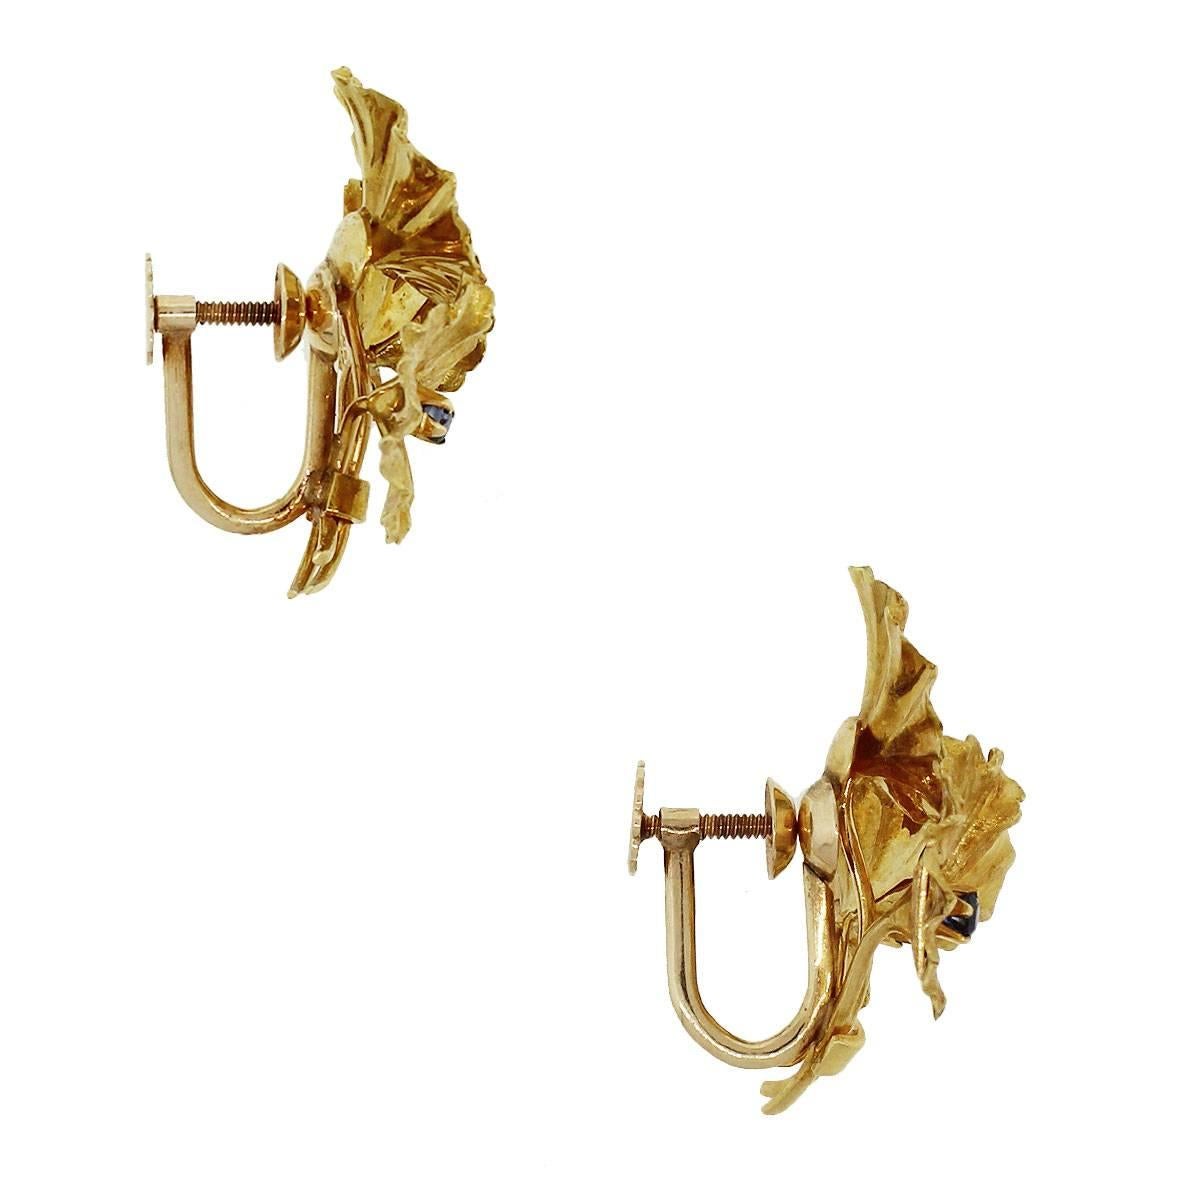 Tiffany & Co. Flower Earrings with Approximately 0.03 ctw of Sapphire. Metal is 18k Yellow Gold. Measurements are 1.06″ x 0.90″ x 1.18″ total weight is 12.4g(7.9dwt). Comes with original Tiffany & Co. pouch. SKU G7076